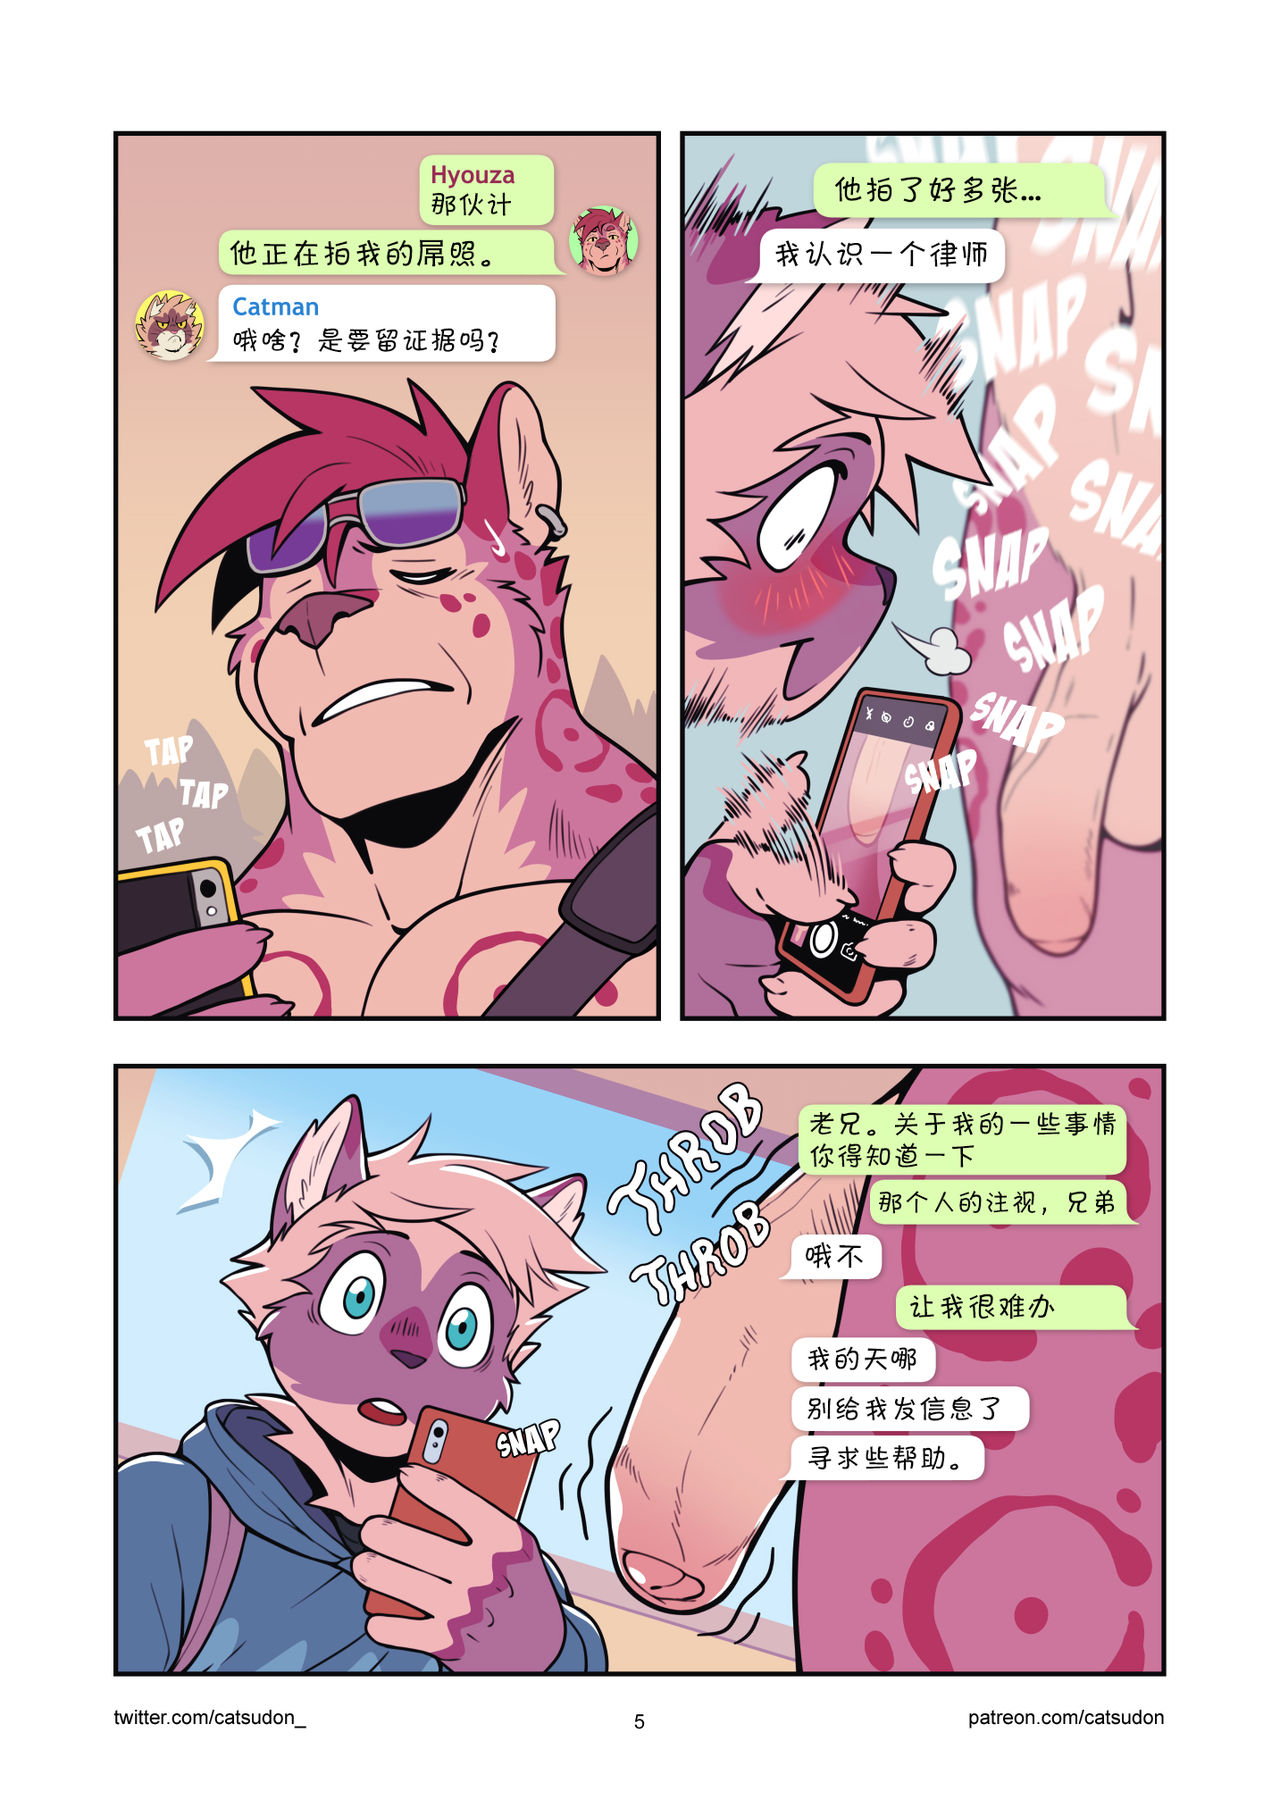 [Catsudon] It's a Good Day to Go to the Nude Beach (Ongoing) [Chinese] 